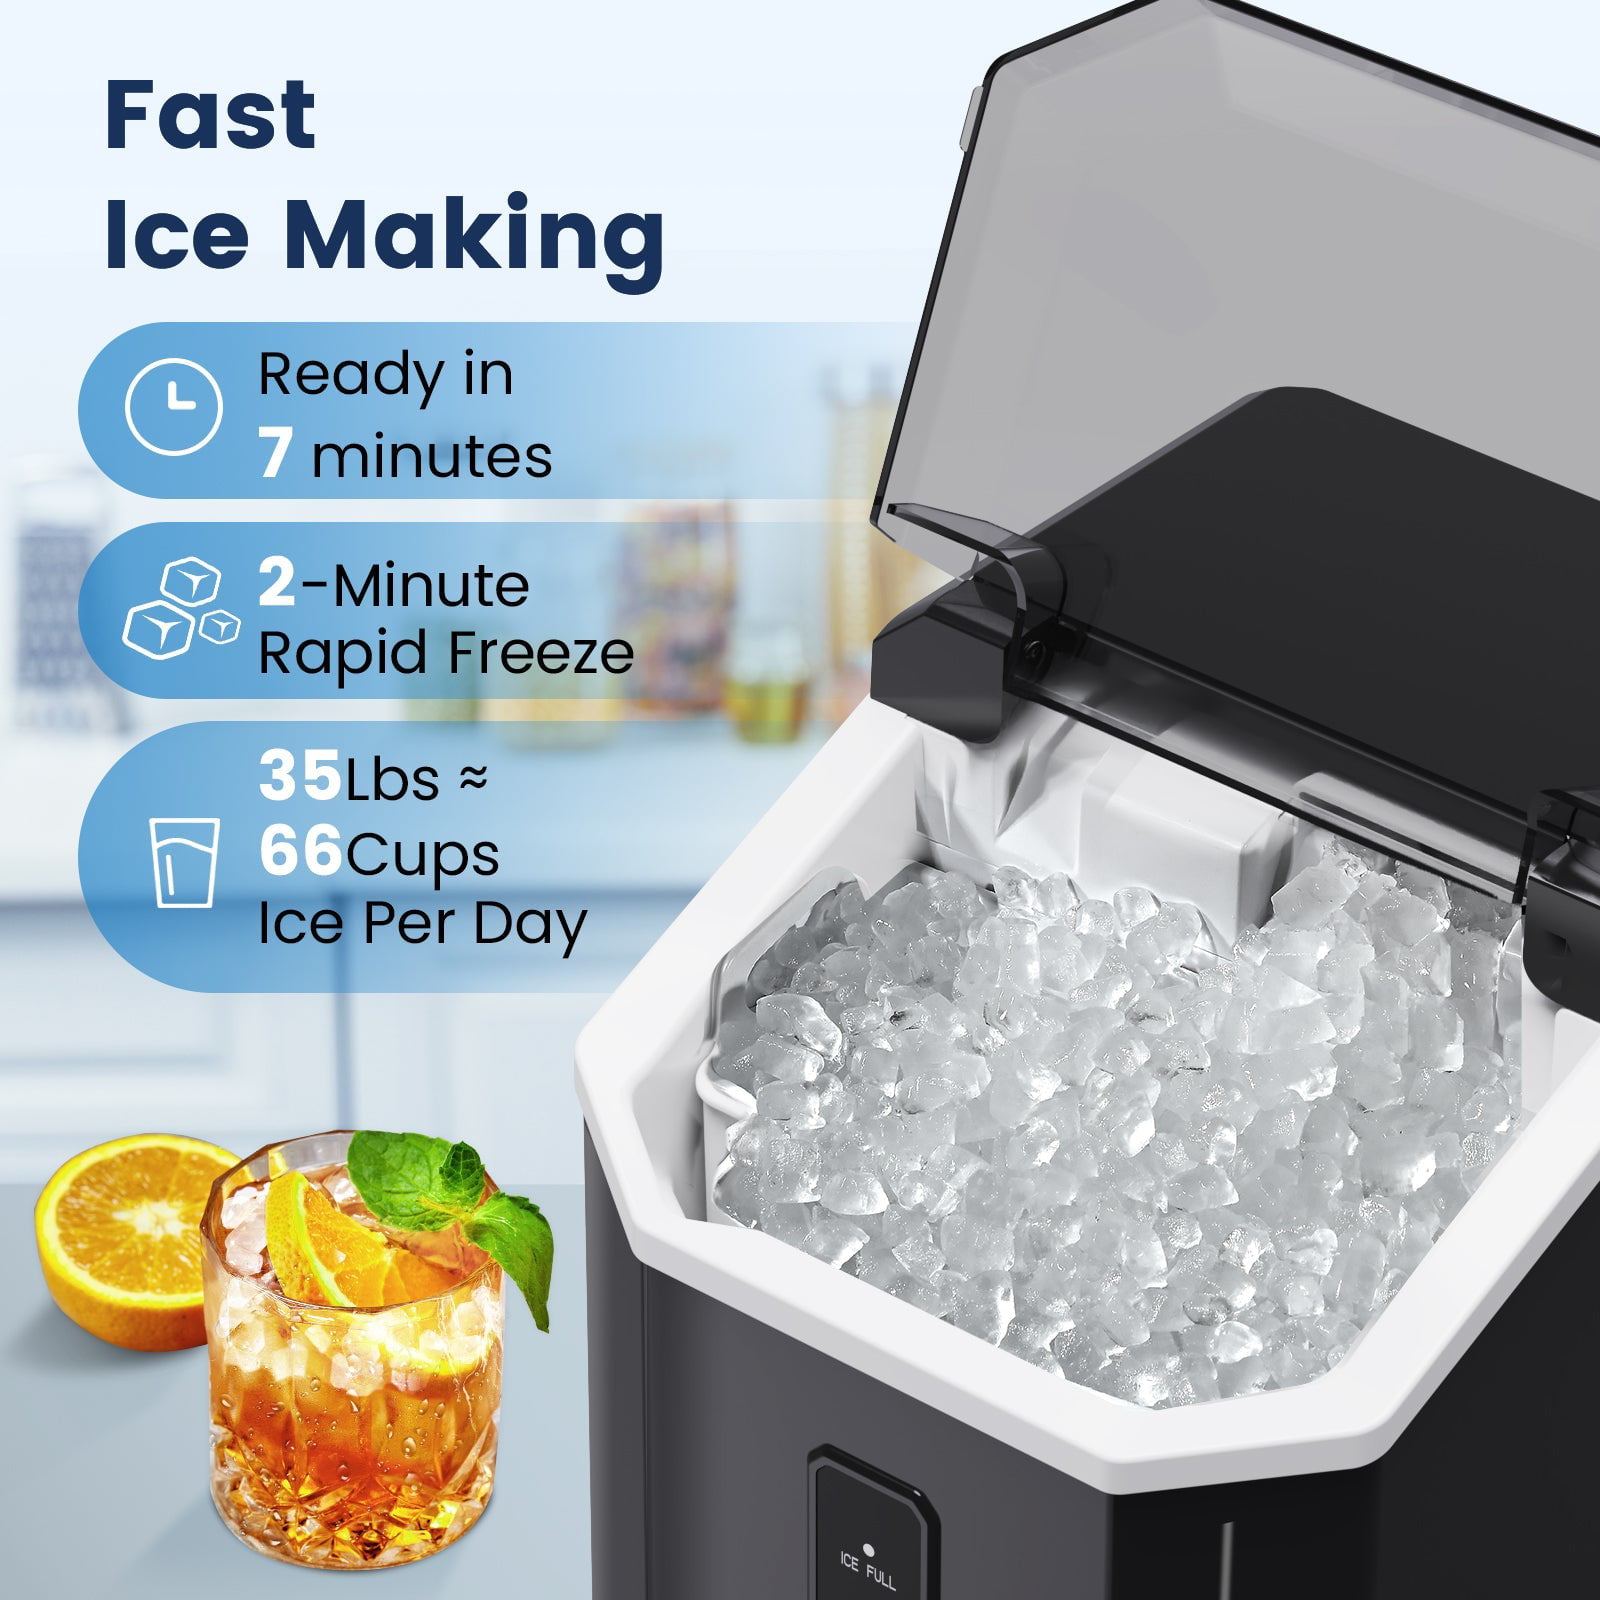 FREE VILLAGE Nugget Ice Maker Countertop, Pebble Ice Maker with